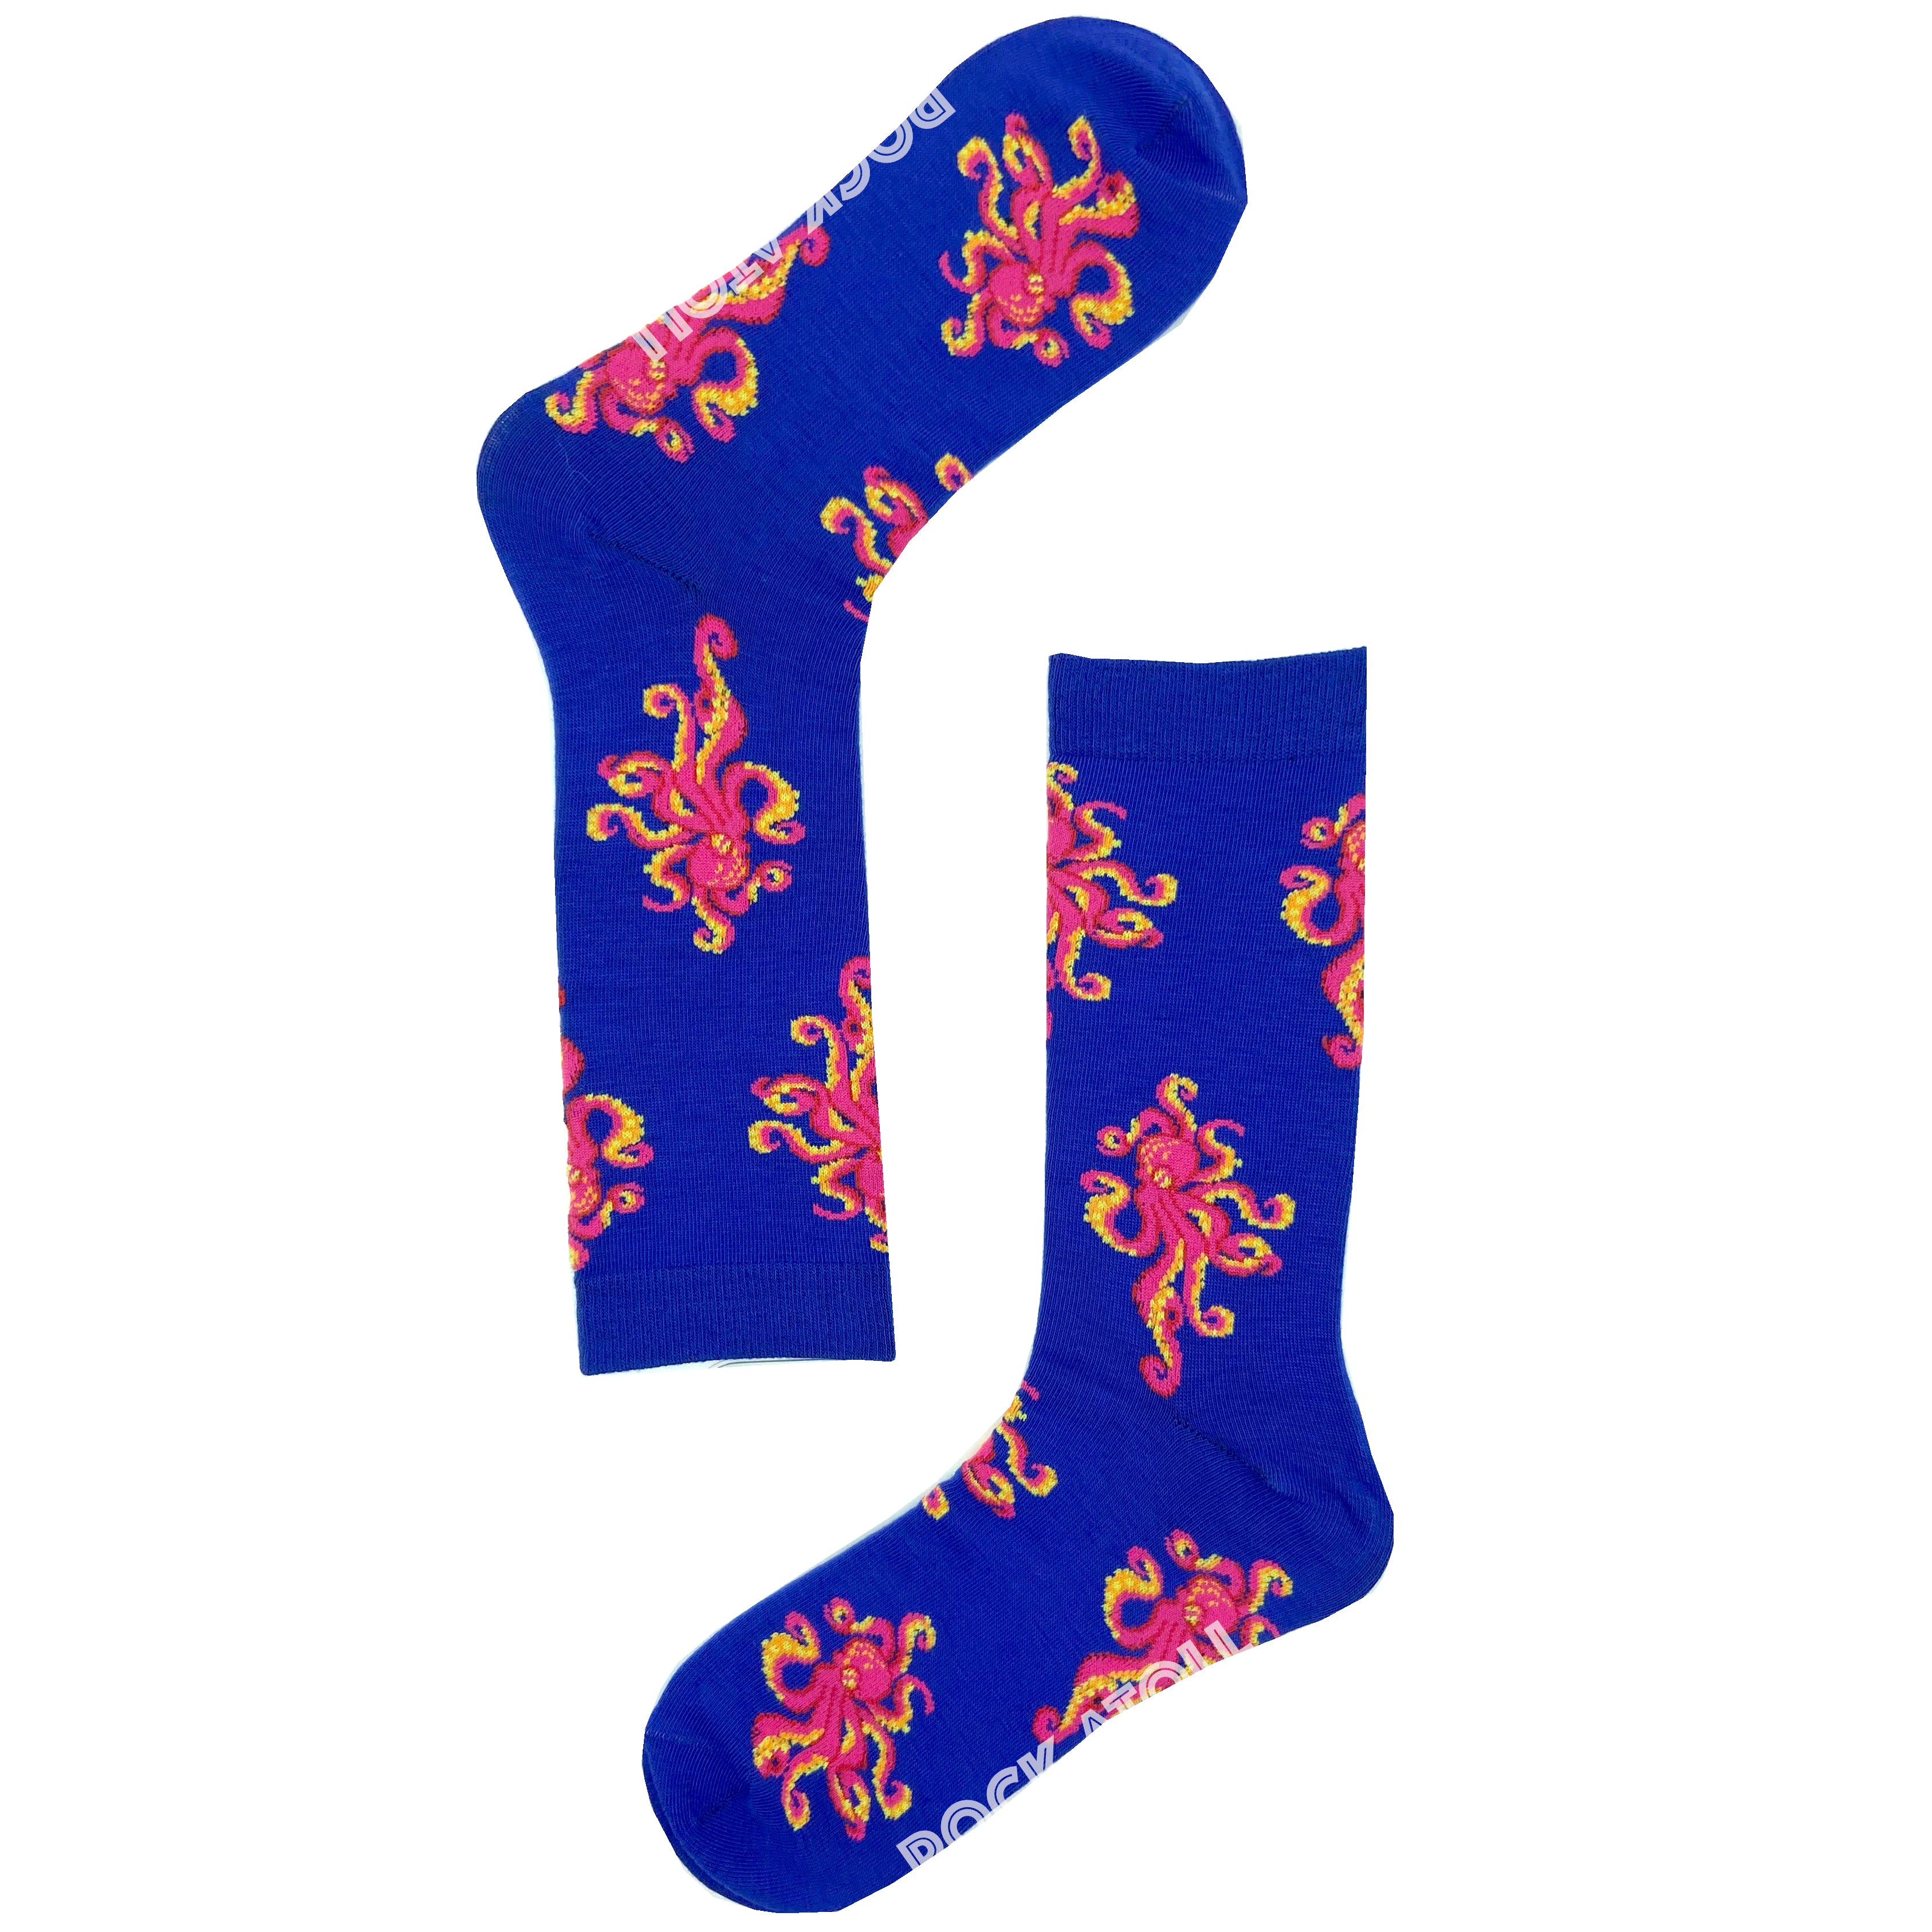 Classic Sea Creatures Inspired Octopus Patterned Novelty Crew Socks